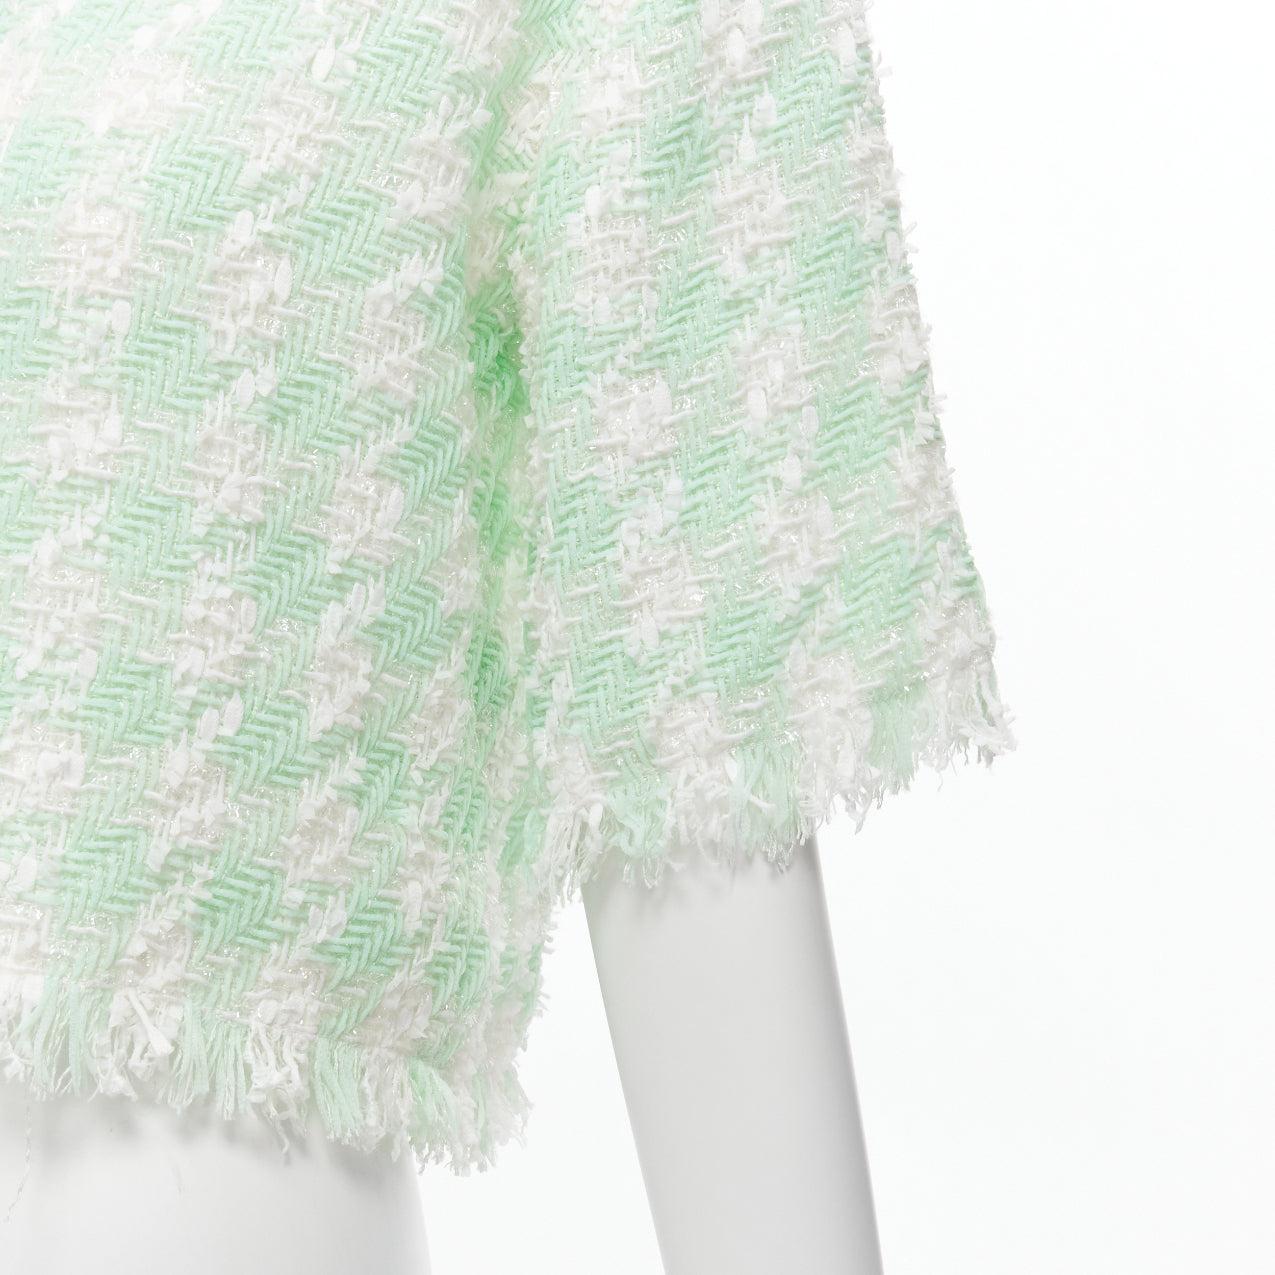 BALMAIN pastel green white lurex tweed half wide boxy cropped top FR34 XS
Reference: AAWC/A00528
Brand: Balmain
Designer: Olivier Rousteing
Material: Polyamide, Blend
Color: White, Green
Pattern: Tweed
Closure: Pullover
Extra Details: Balmain's top